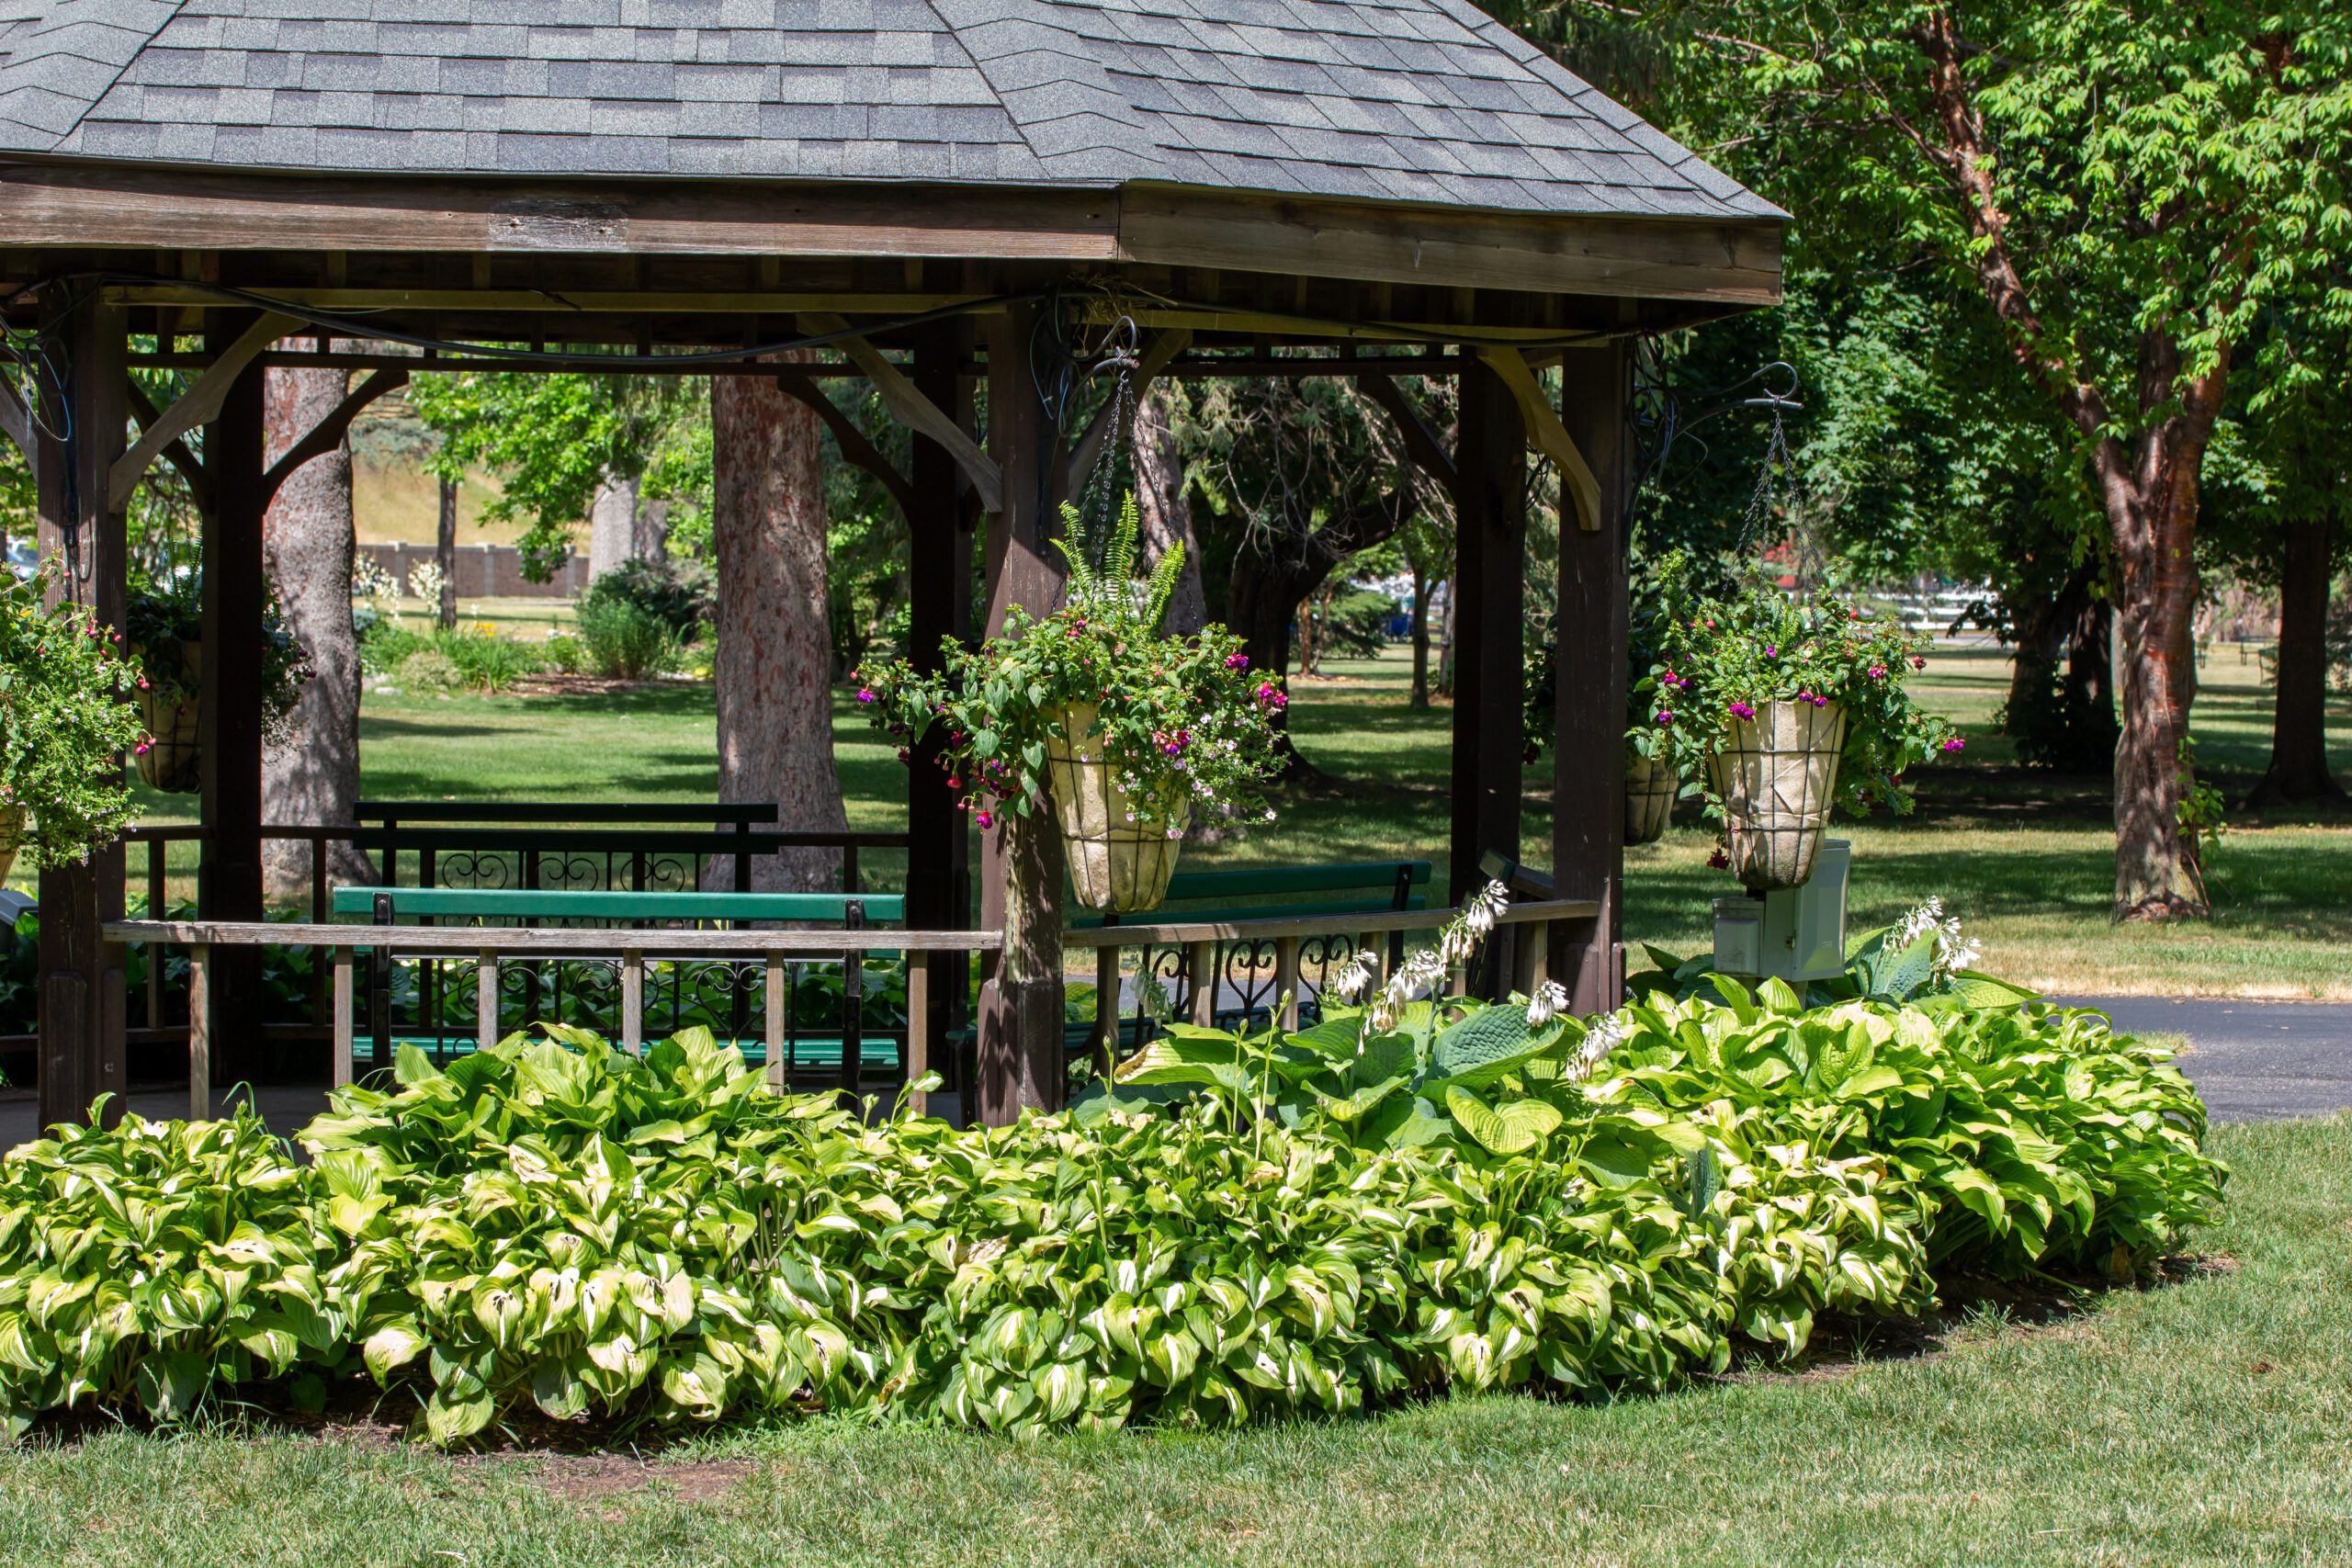 A wooden gazebo surrounded by hostas and hanging baskets of flowers.